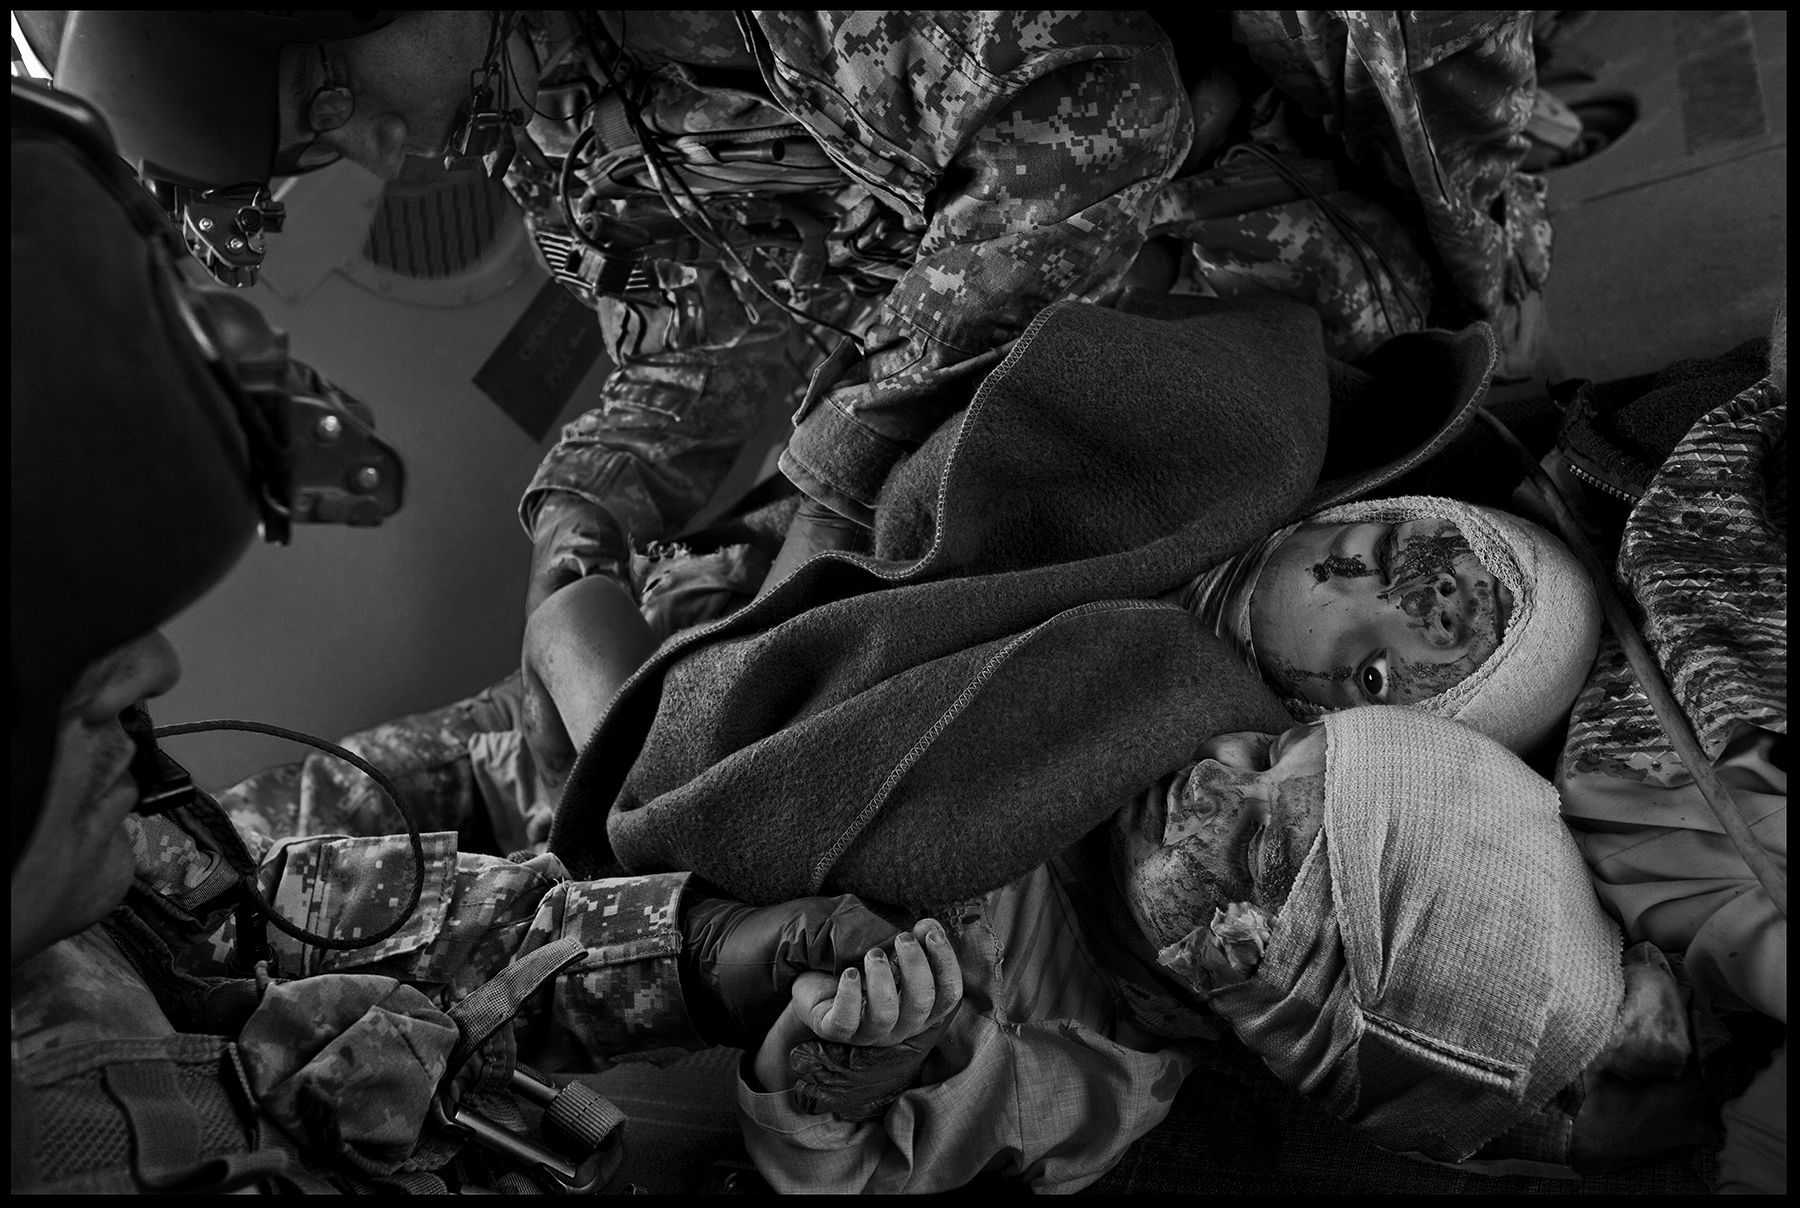 Wounded Afghan Children, 2011